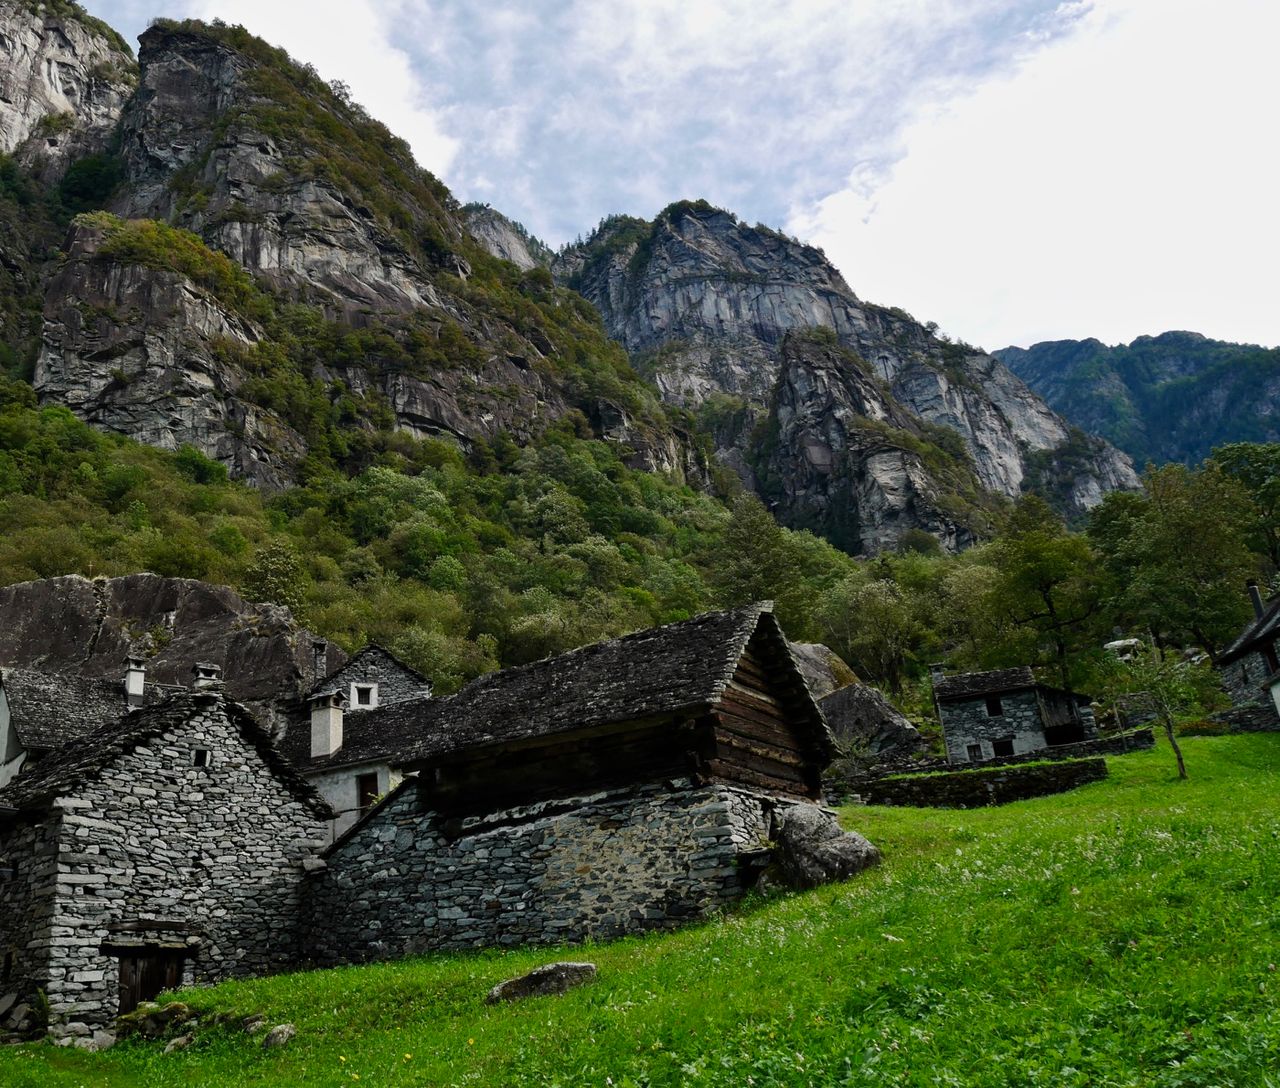 A village in the valley.